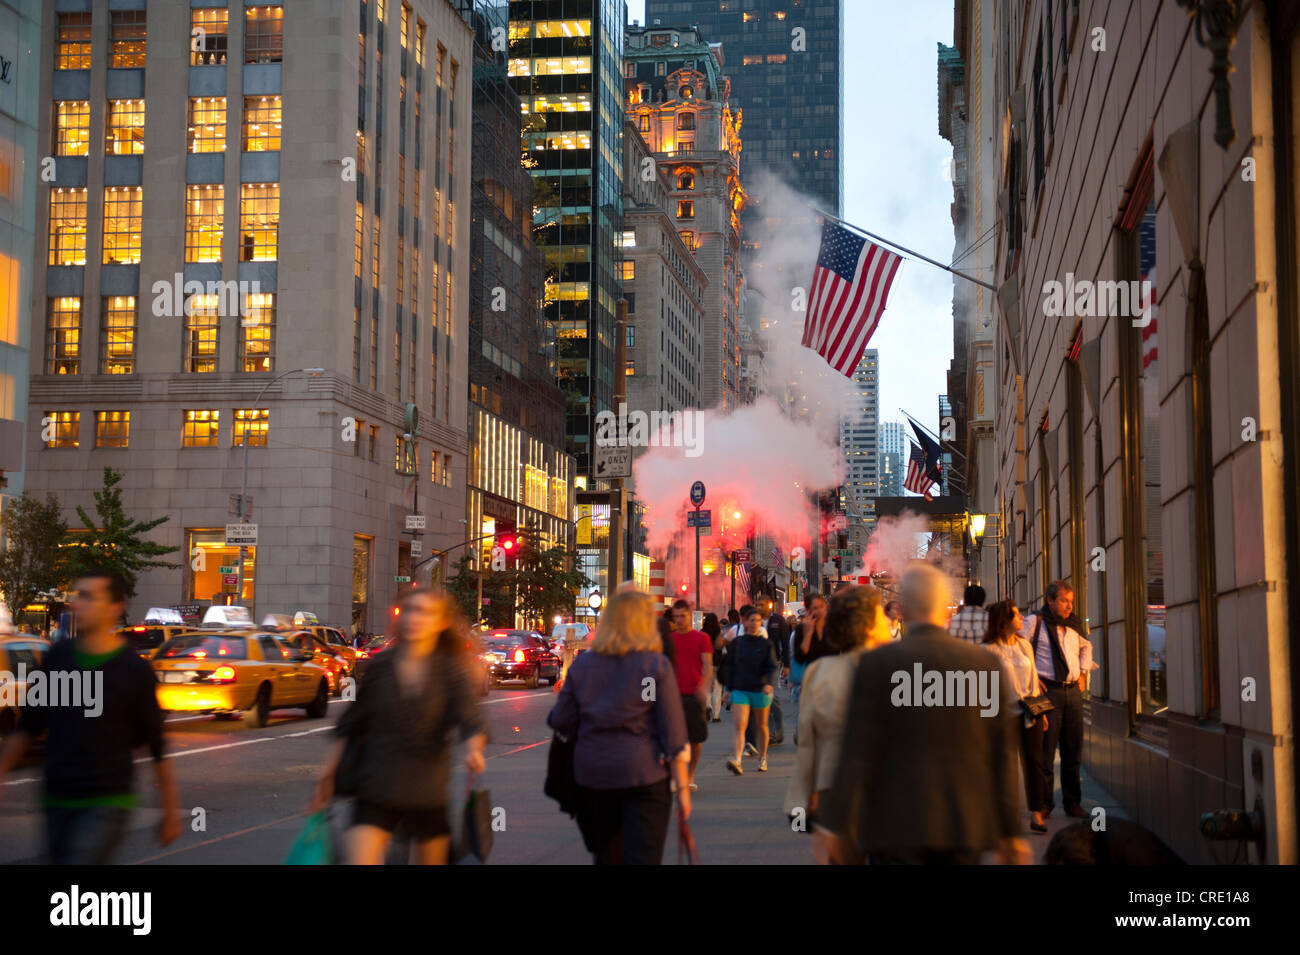 Many people on 5th Avenue close to Trump Tower in the evening, Midtown, Manhattan, New York City, USA, North America Stock Photo